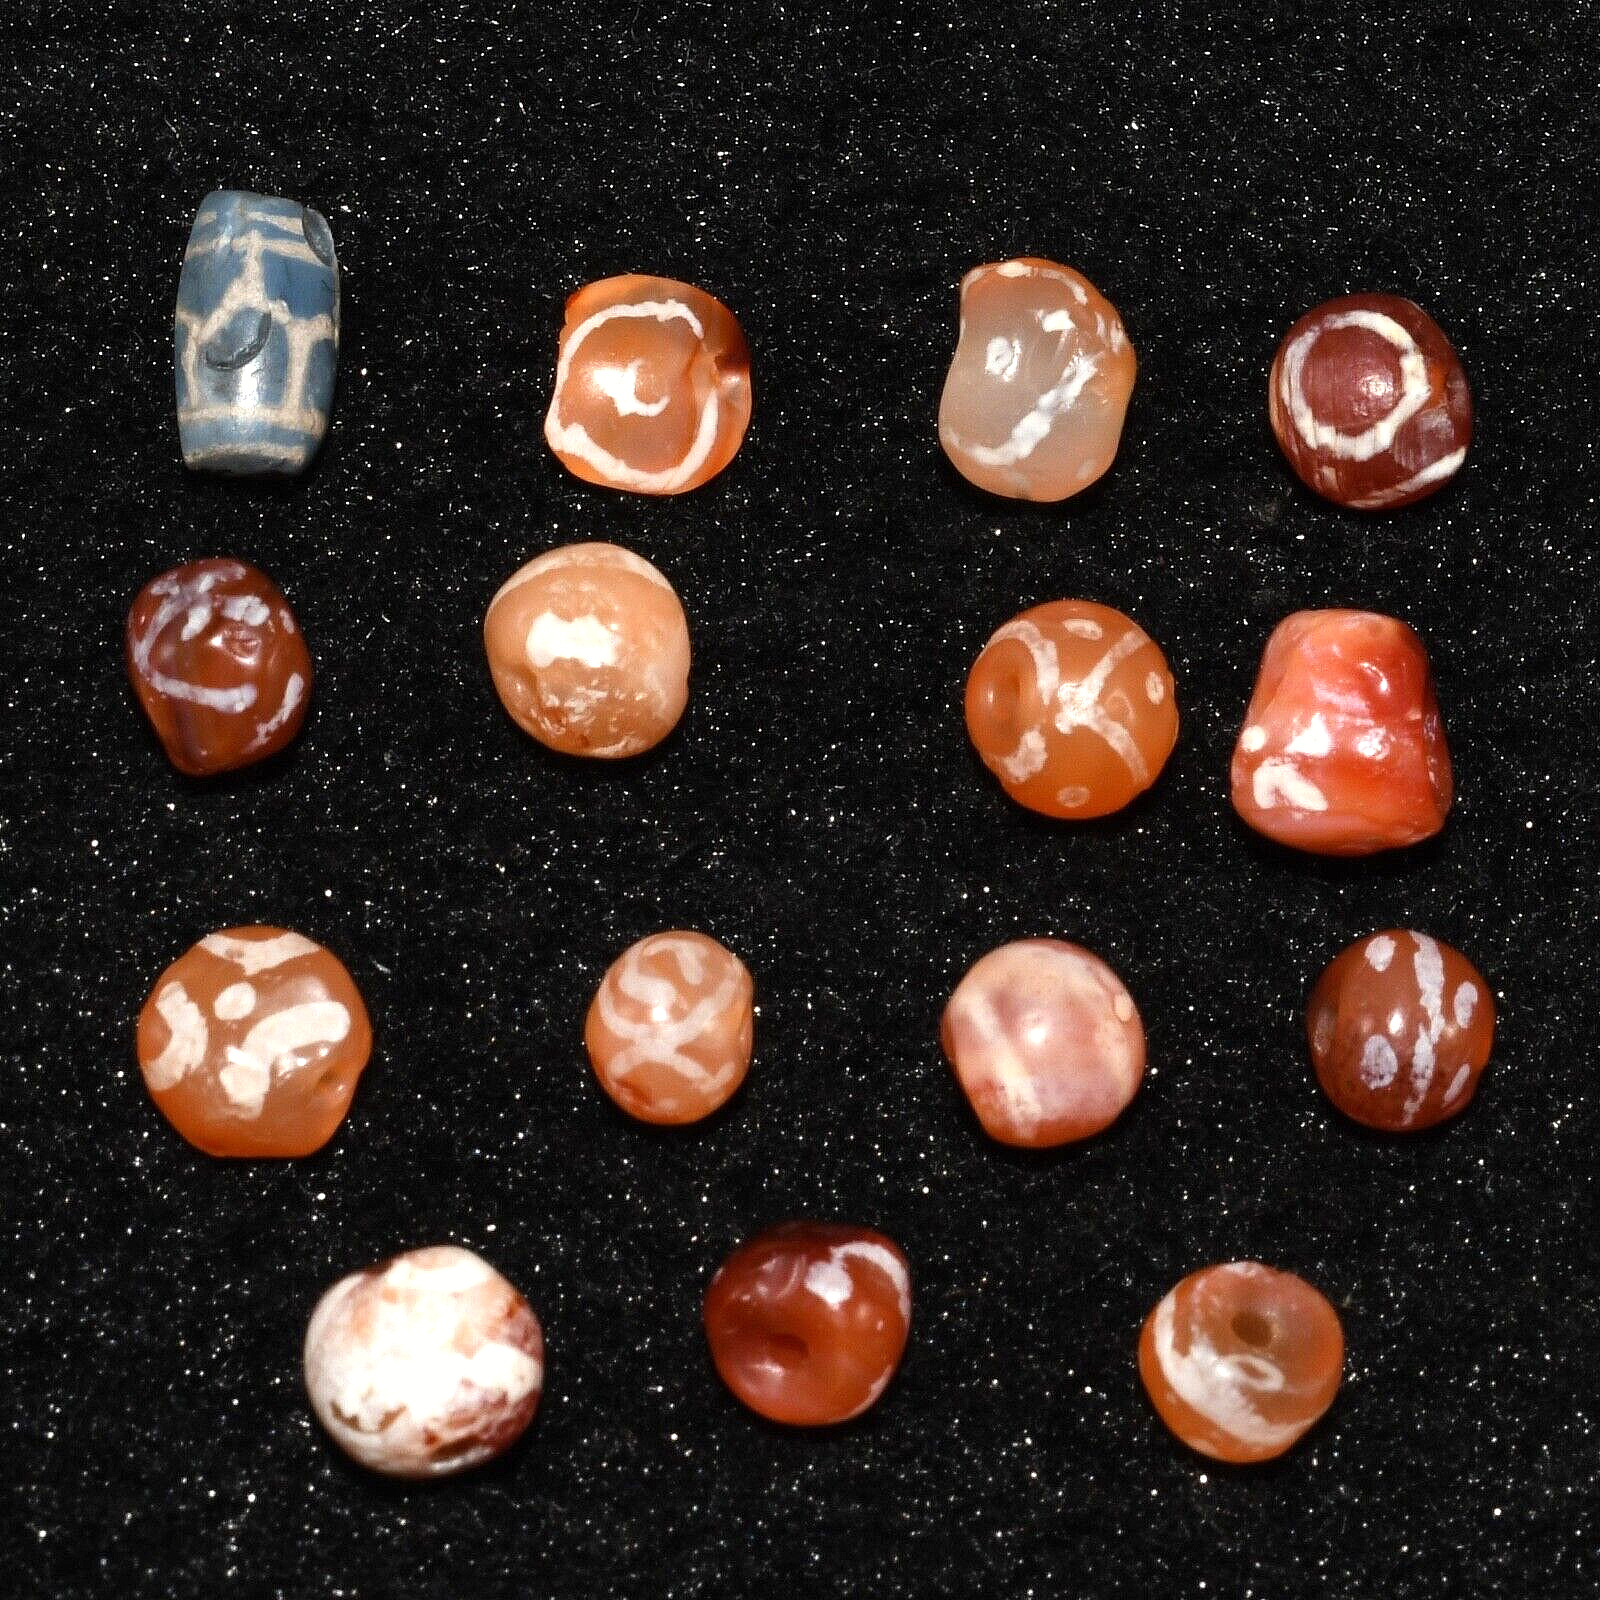 15 Ancient Longevity Etched Carnelian Beads in good Condition over 2000 Year Old